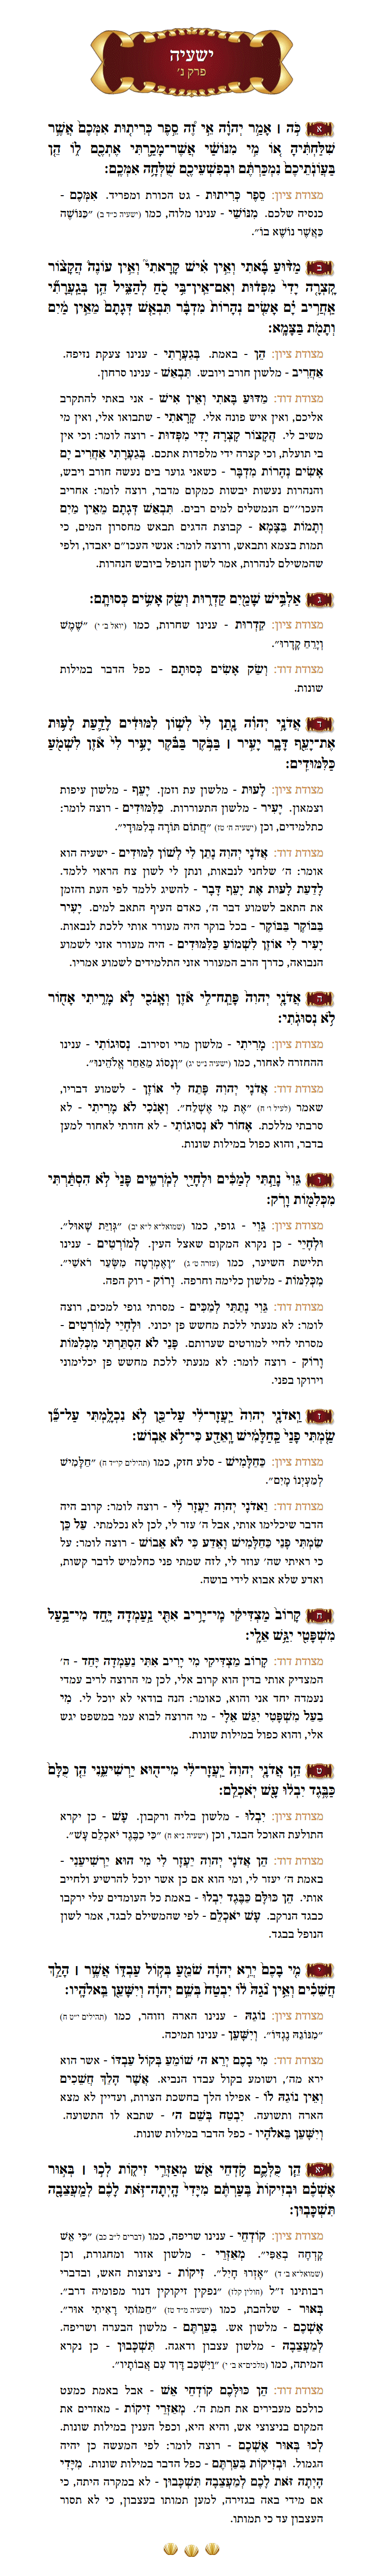 Sefer Yeshayohu Chapter 50 with commentary